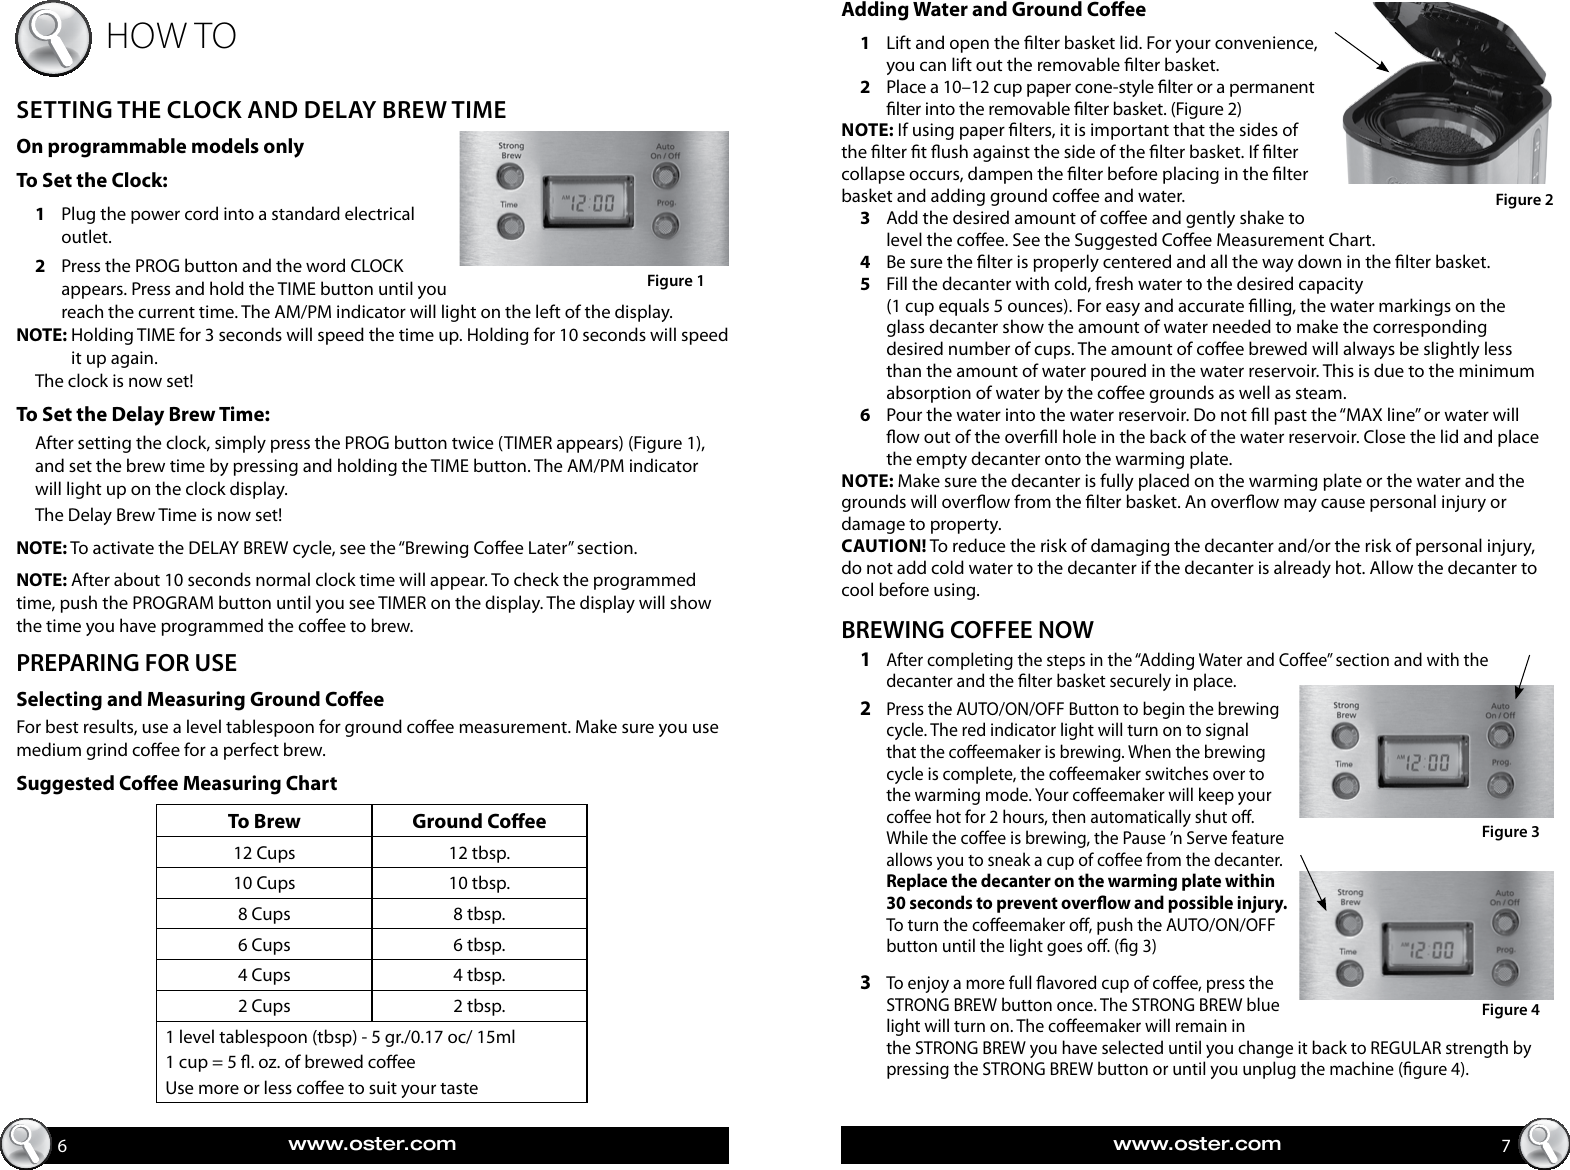 Page 4 of 12 - Oster Oster-12-Cup-Coffeemaker-Users-Manual-  Oster-12-cup-coffeemaker-users-manual